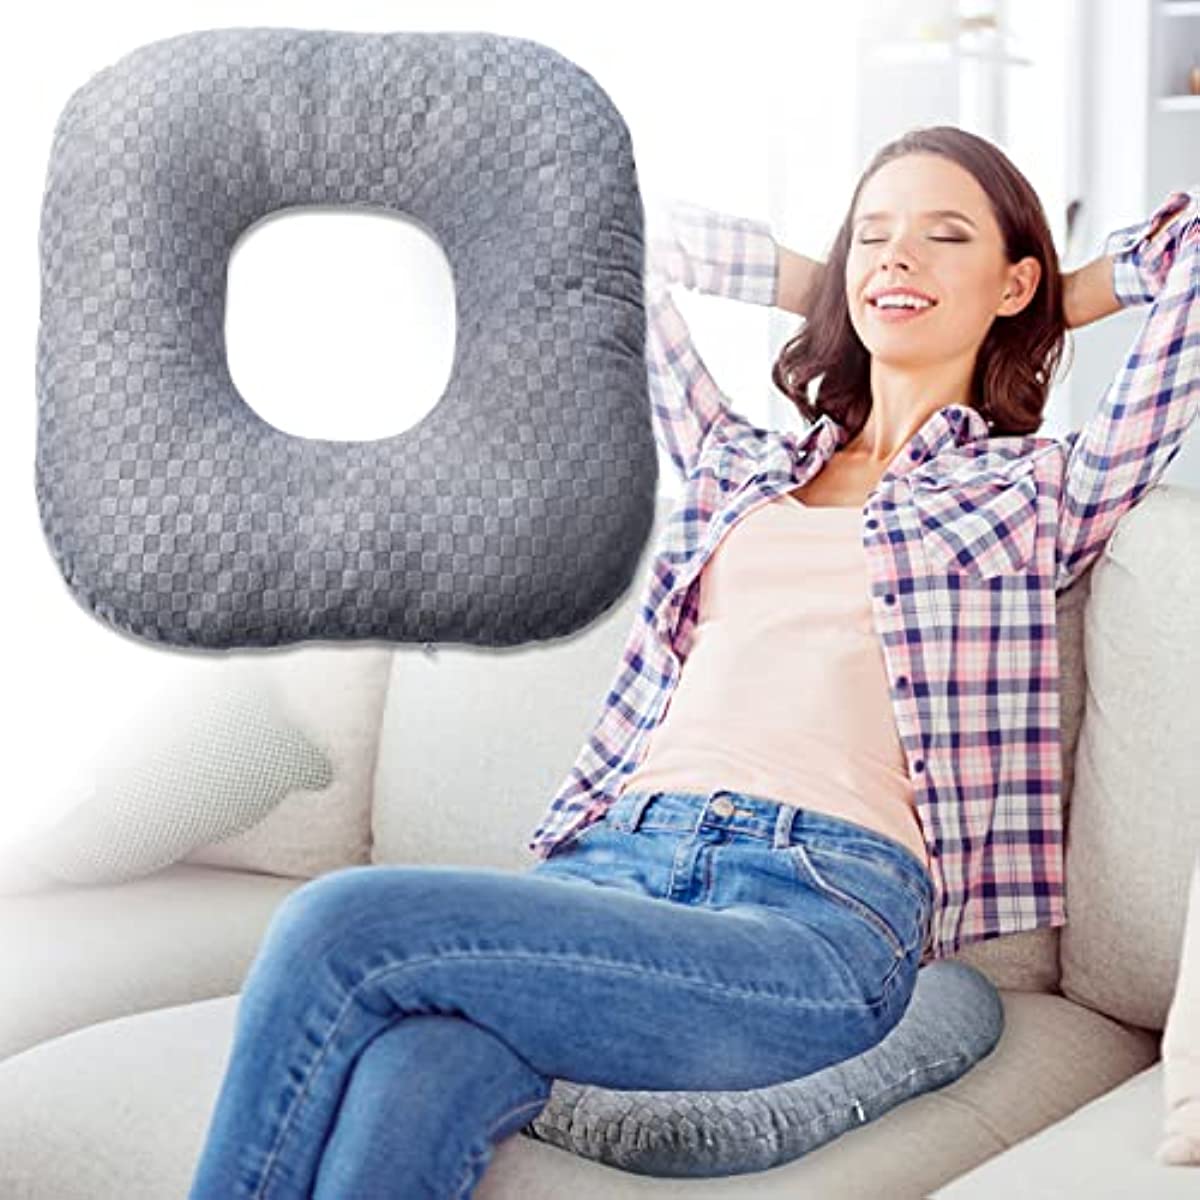 Vinban Stuffed Donut Pillow Seat Cushion | for Tailbone and Coccyx Pain, Hemorrhoids, Bed Sores, Pregnancy, Prostate, Surgery Recovery, Sitting Pressure Relief, for Home, Office and Car (Grey)